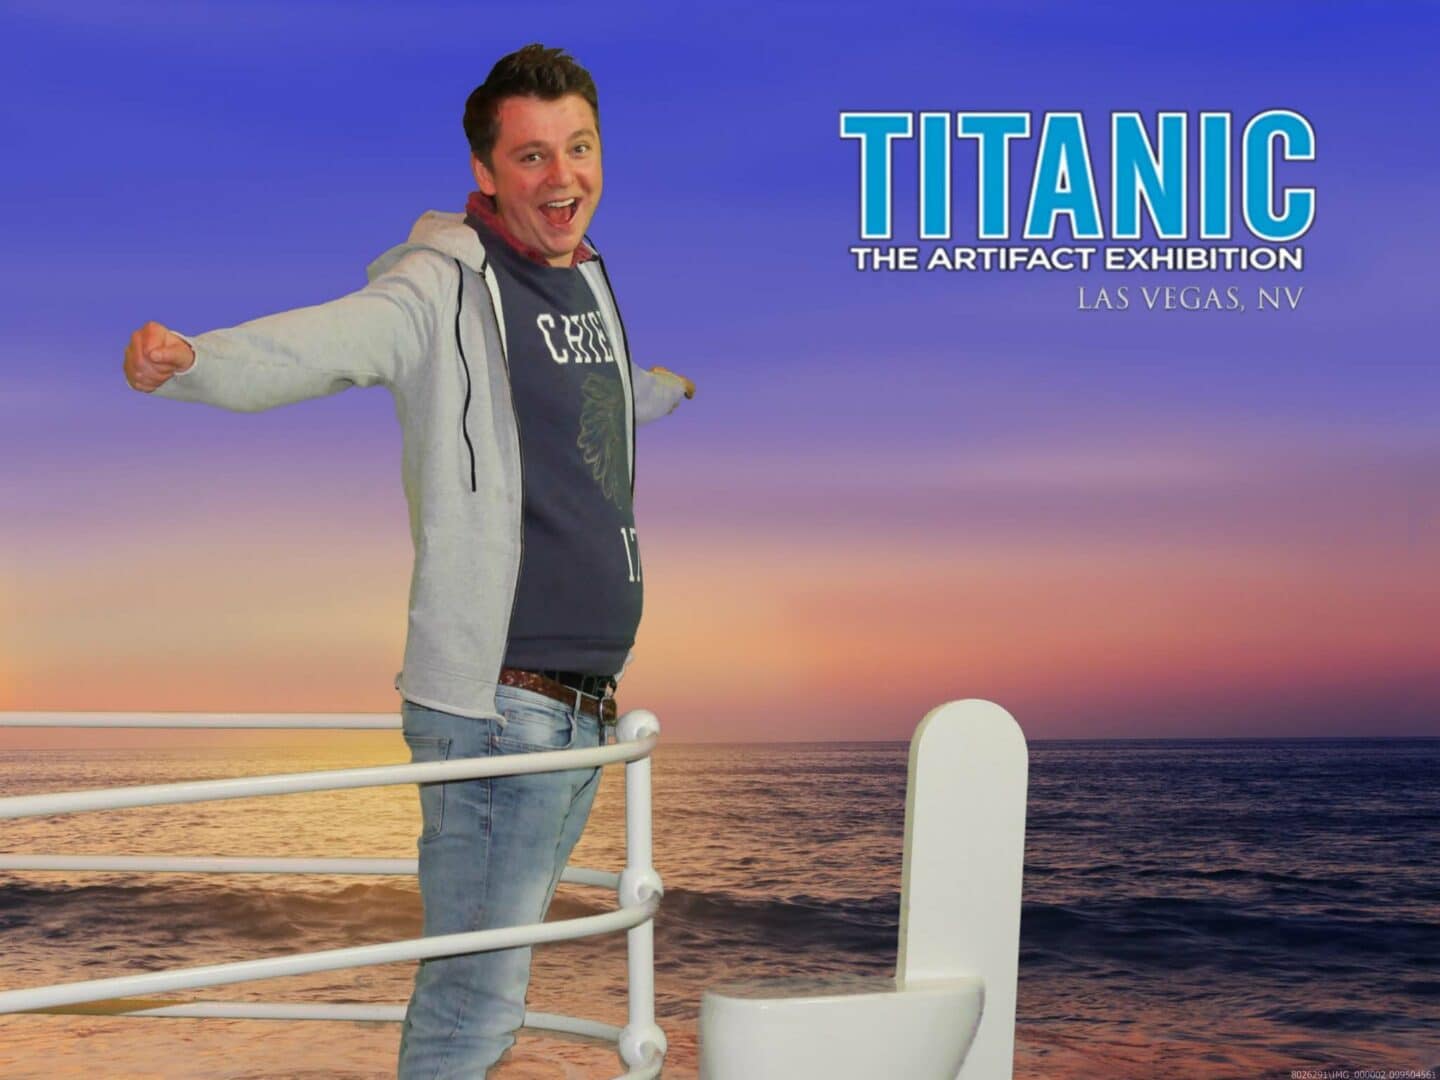 Me replicating a famous movie scene at the Titanic Artifact Exhibition in the Luxor Hotel.